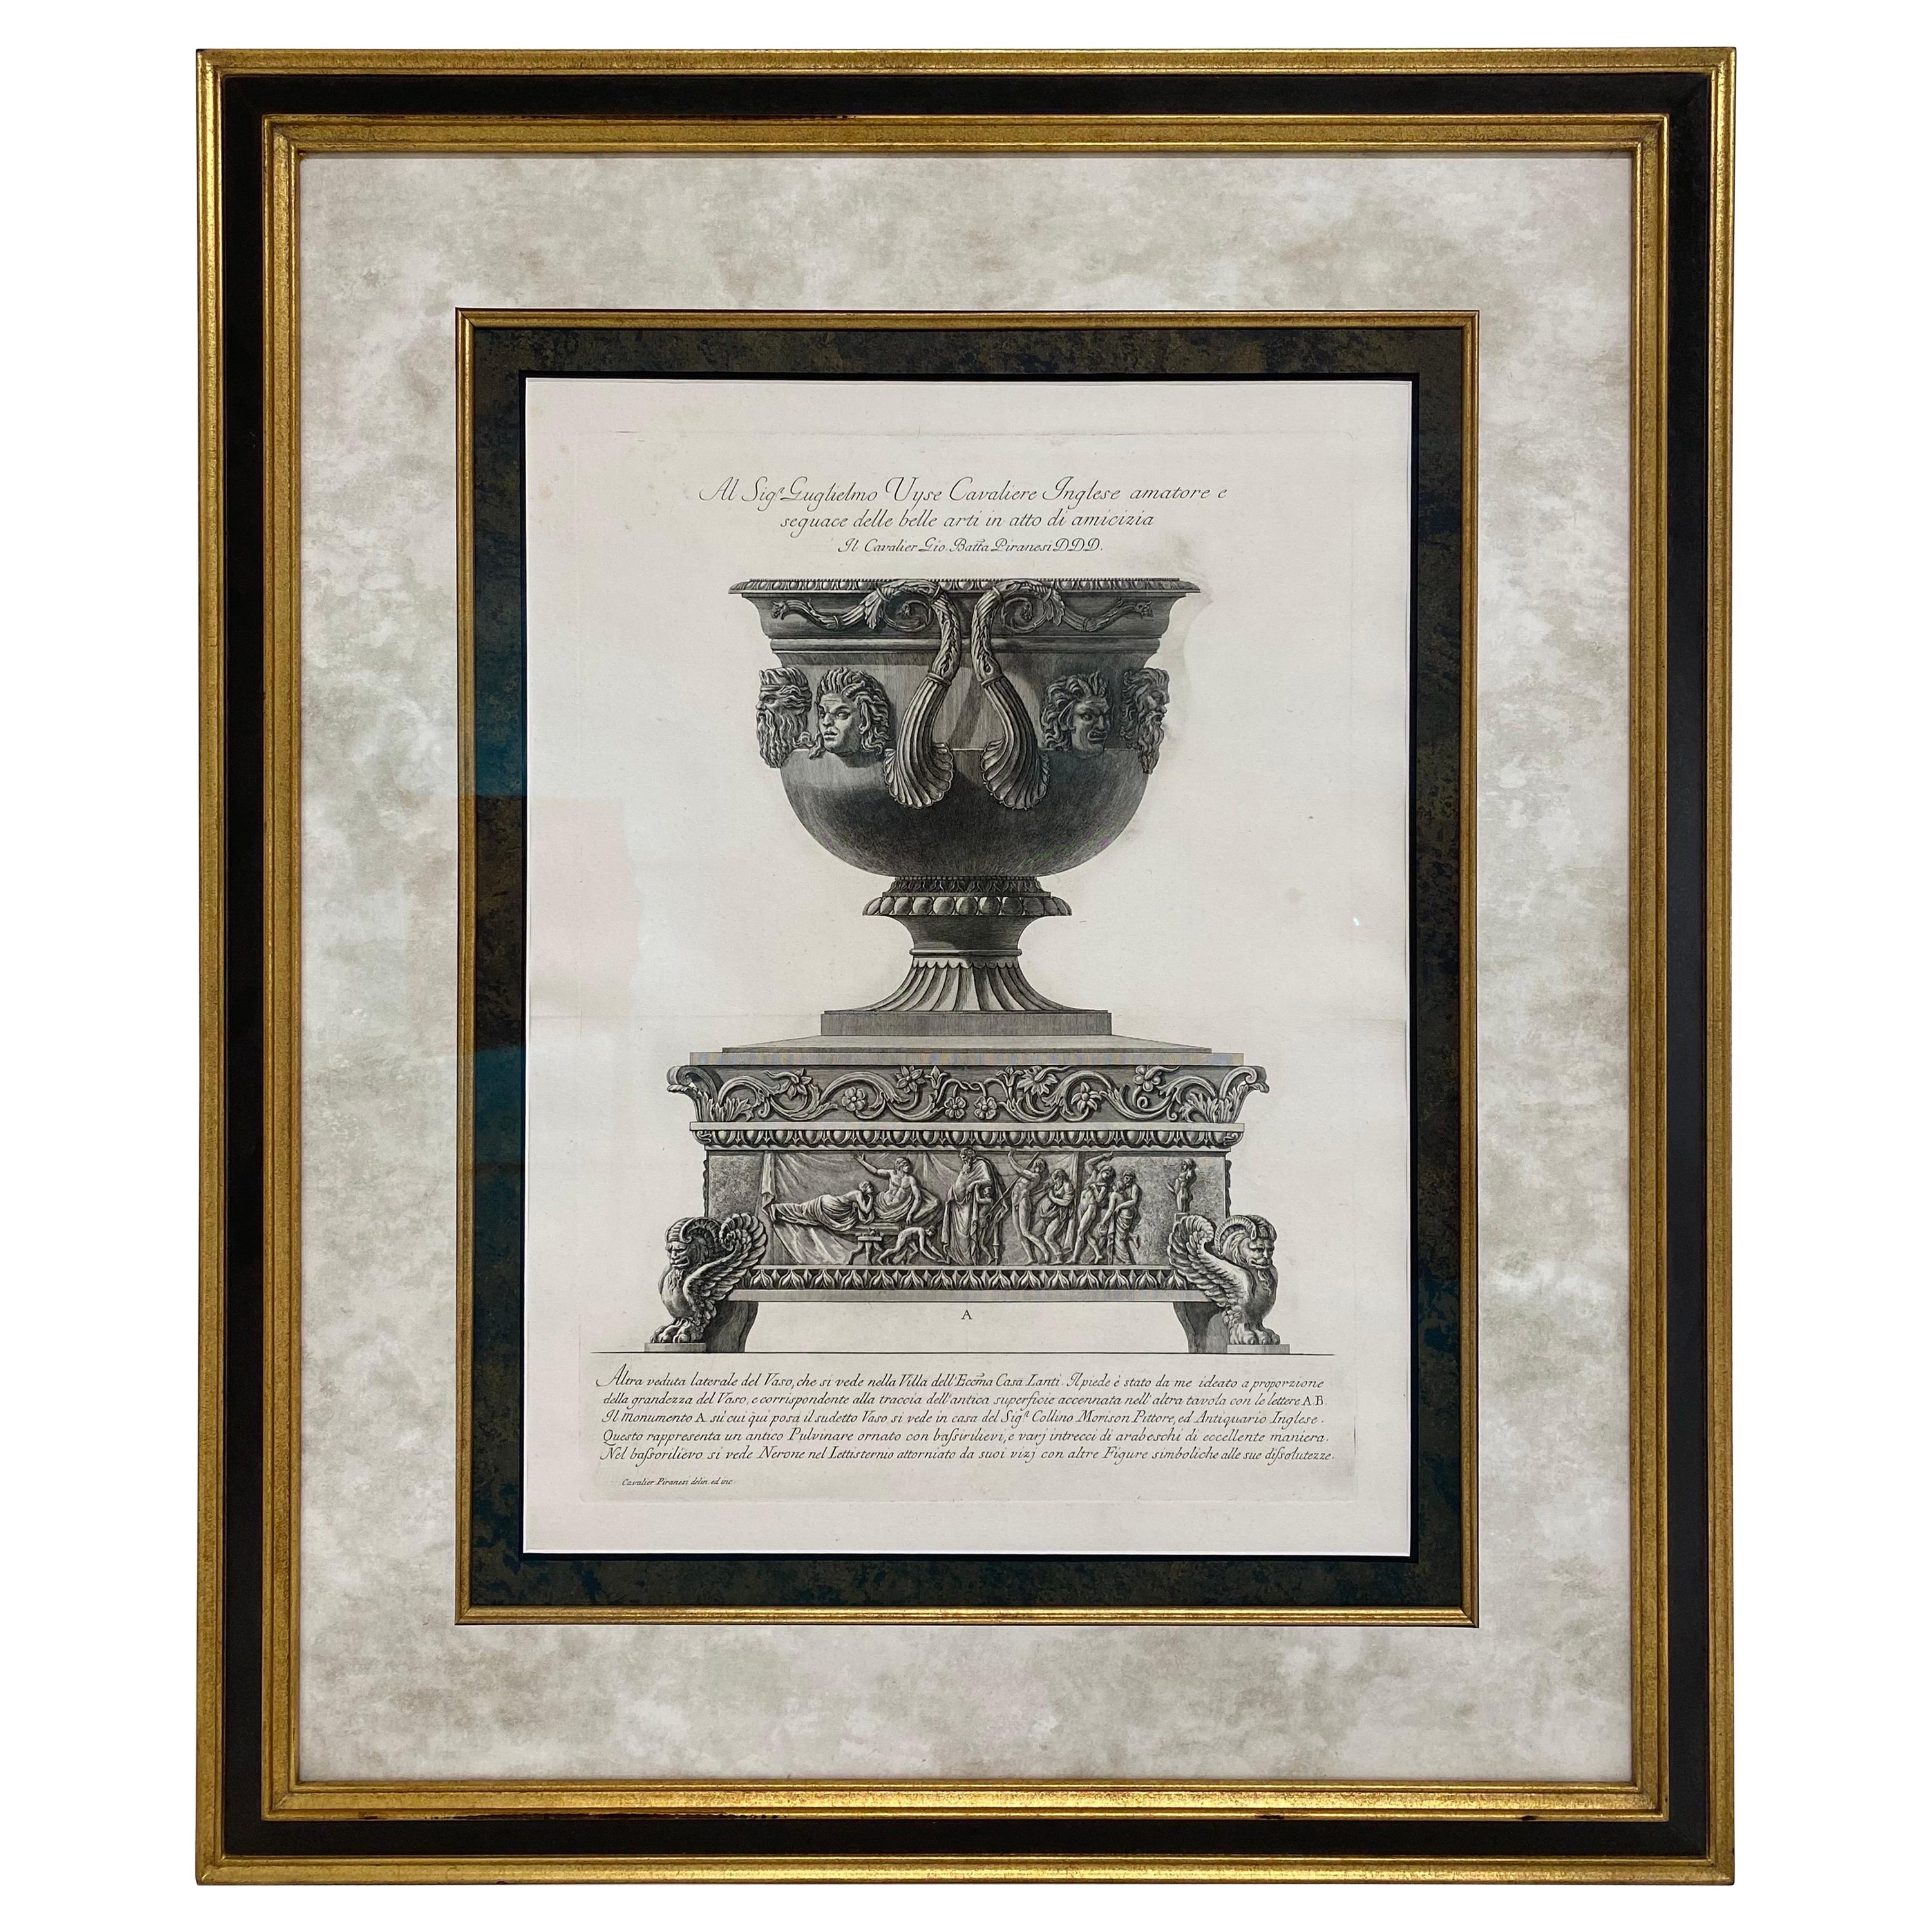 Giovanni Battista piranesi large copper plate etching. For Sale at 1stDibs